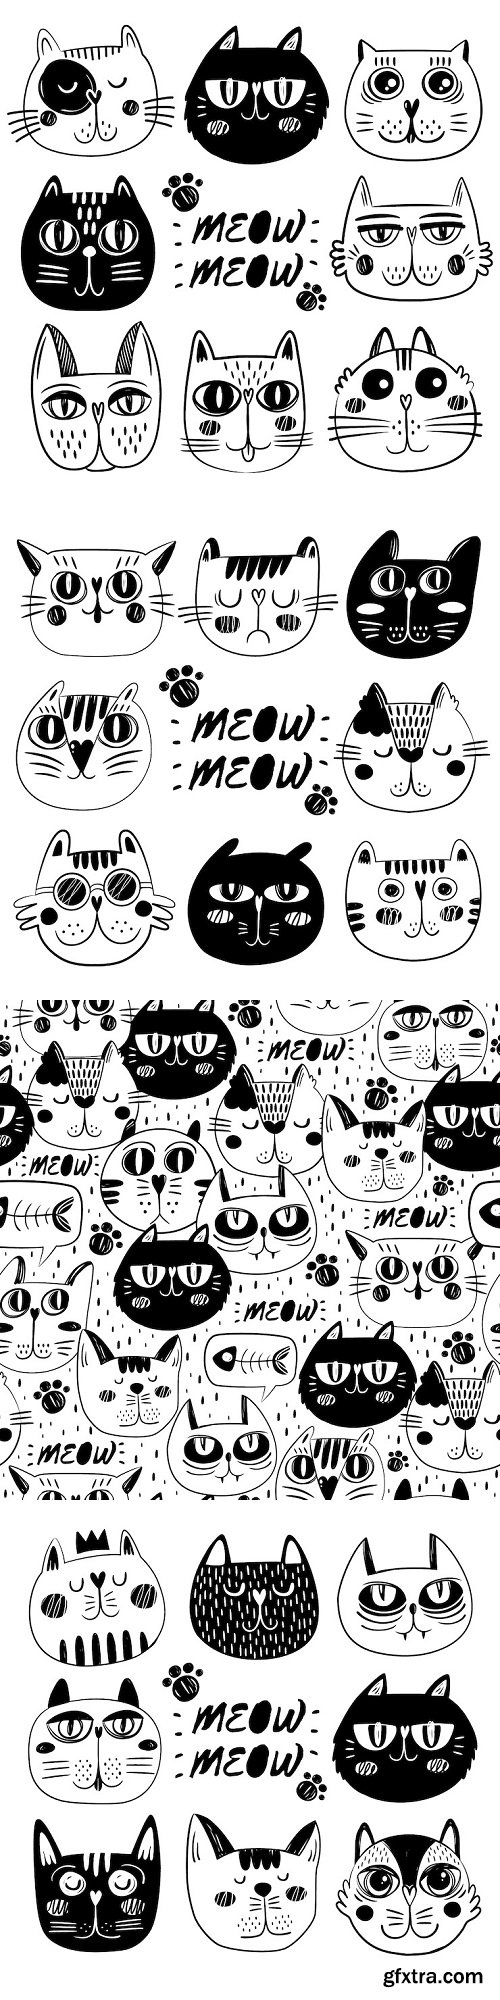 Funny cat faces collection